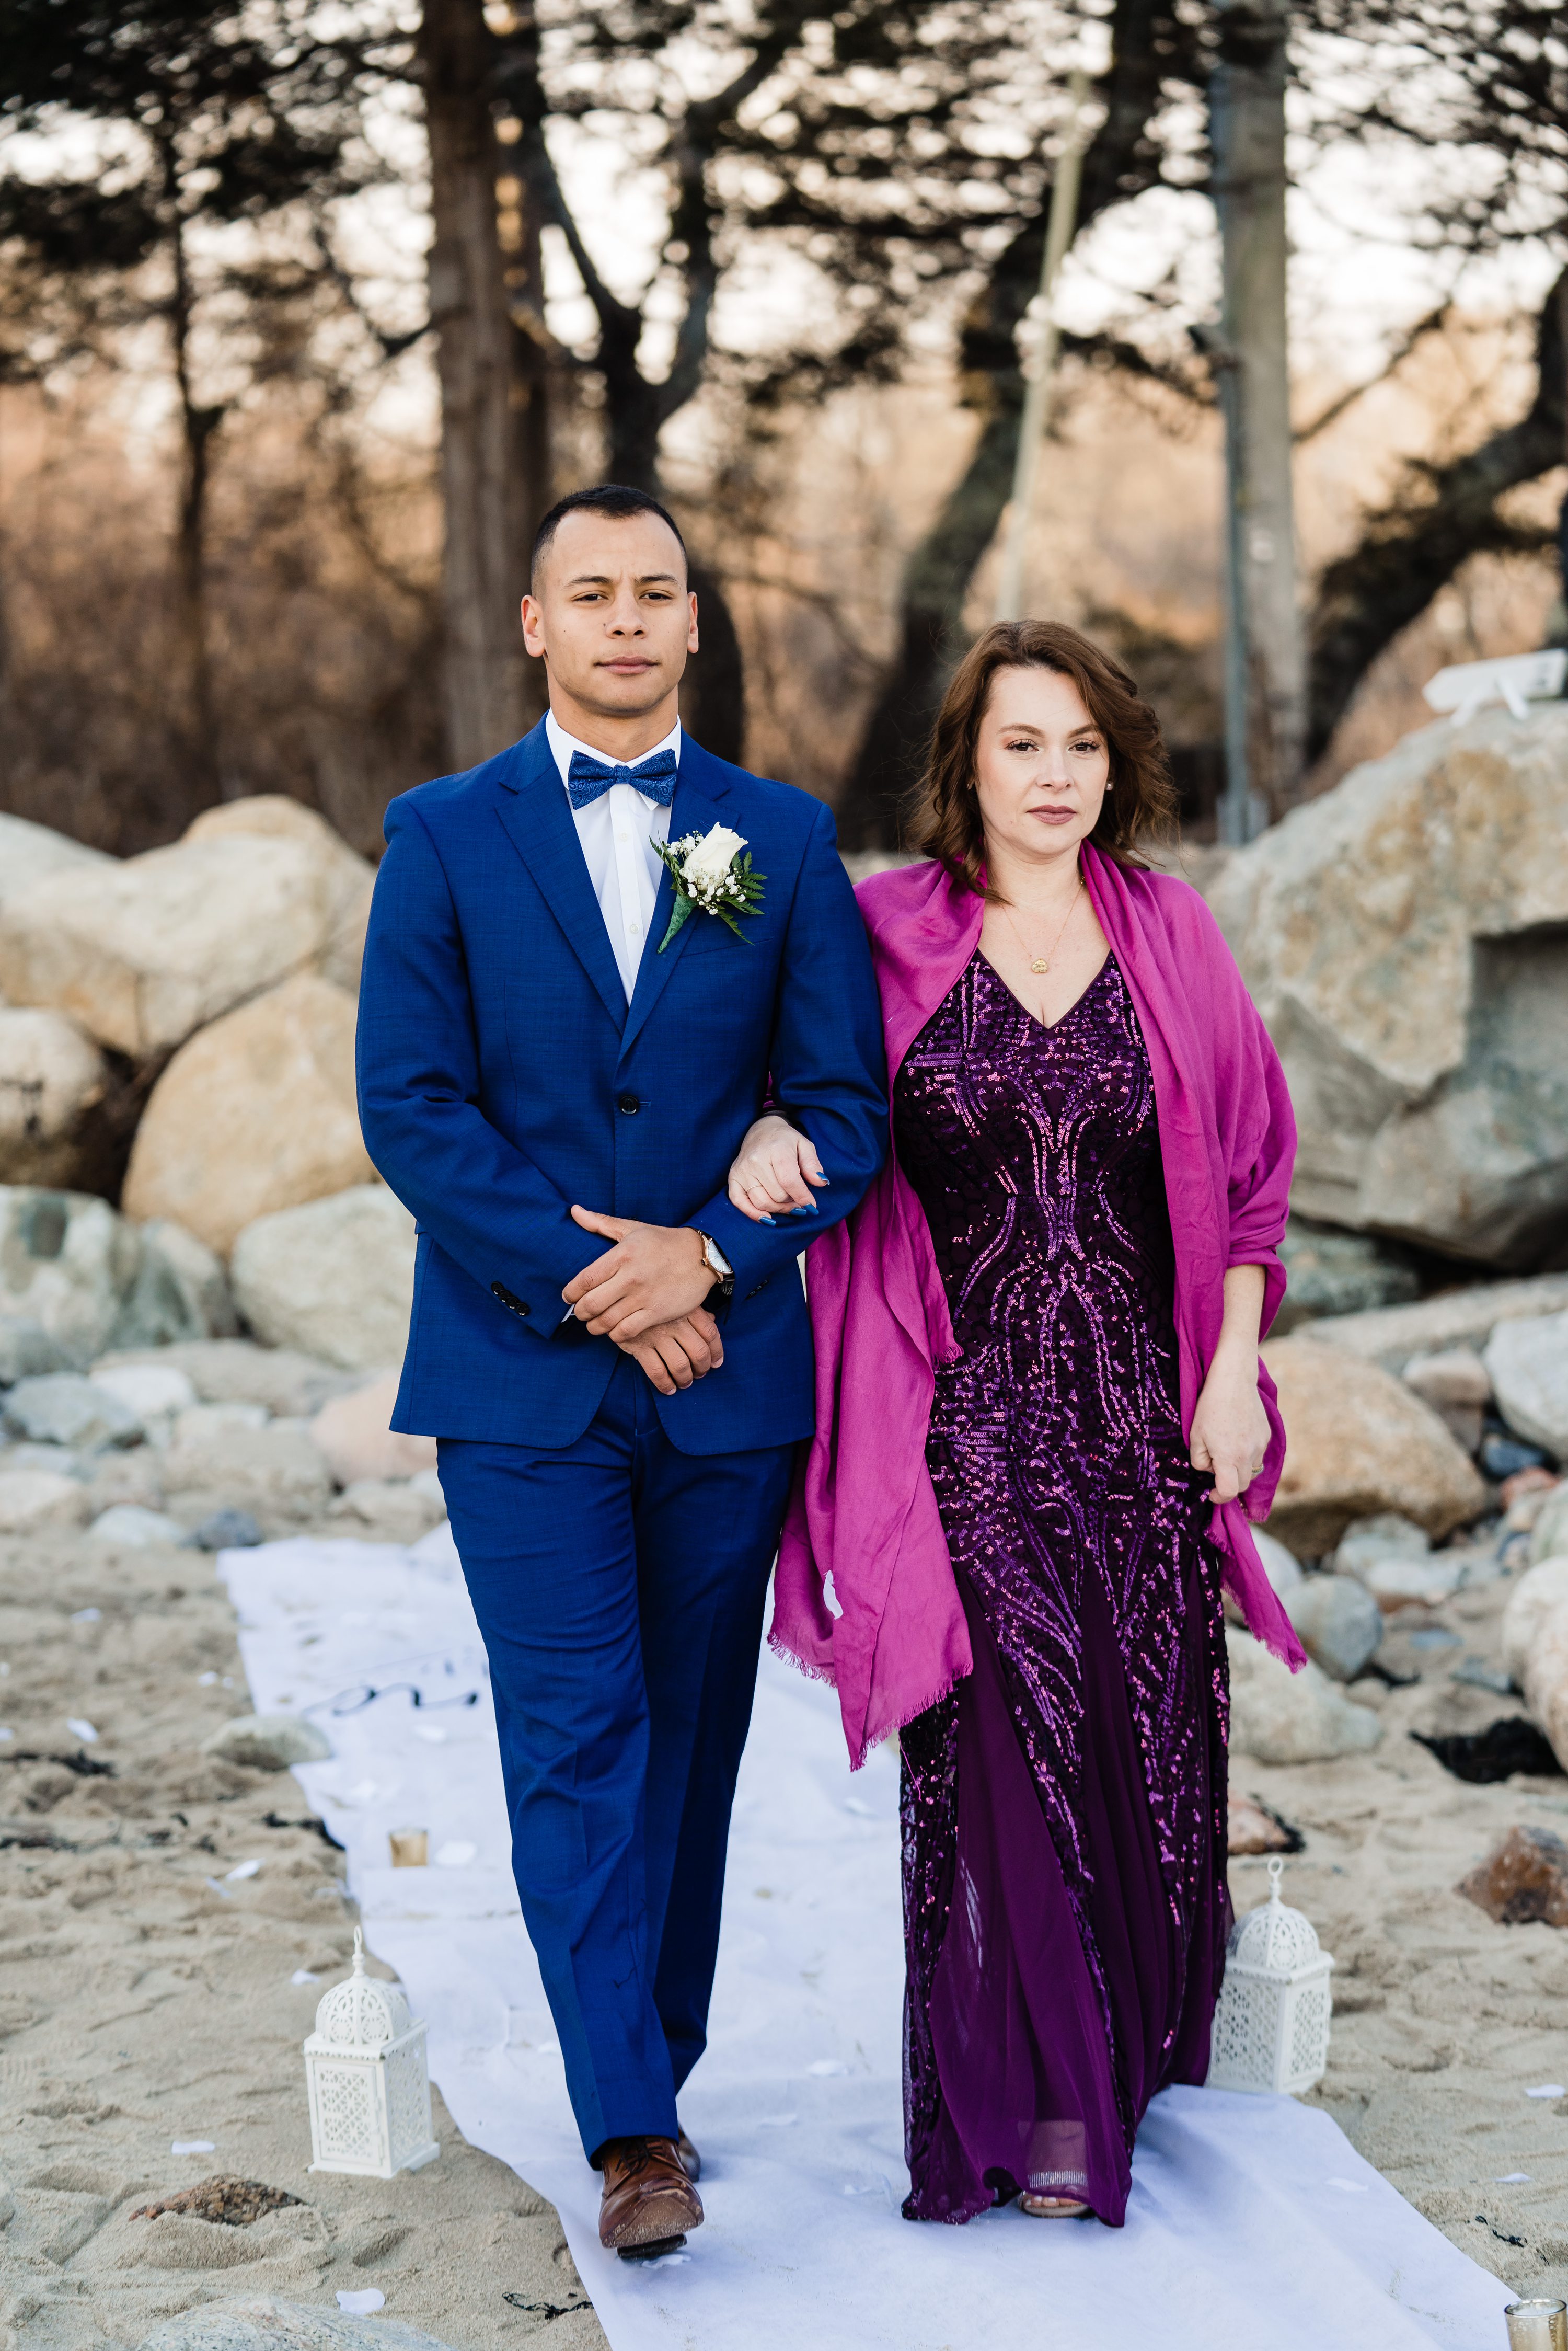 new enland wedding photographer,Natural wedding photography,mom and groom walking down aisle